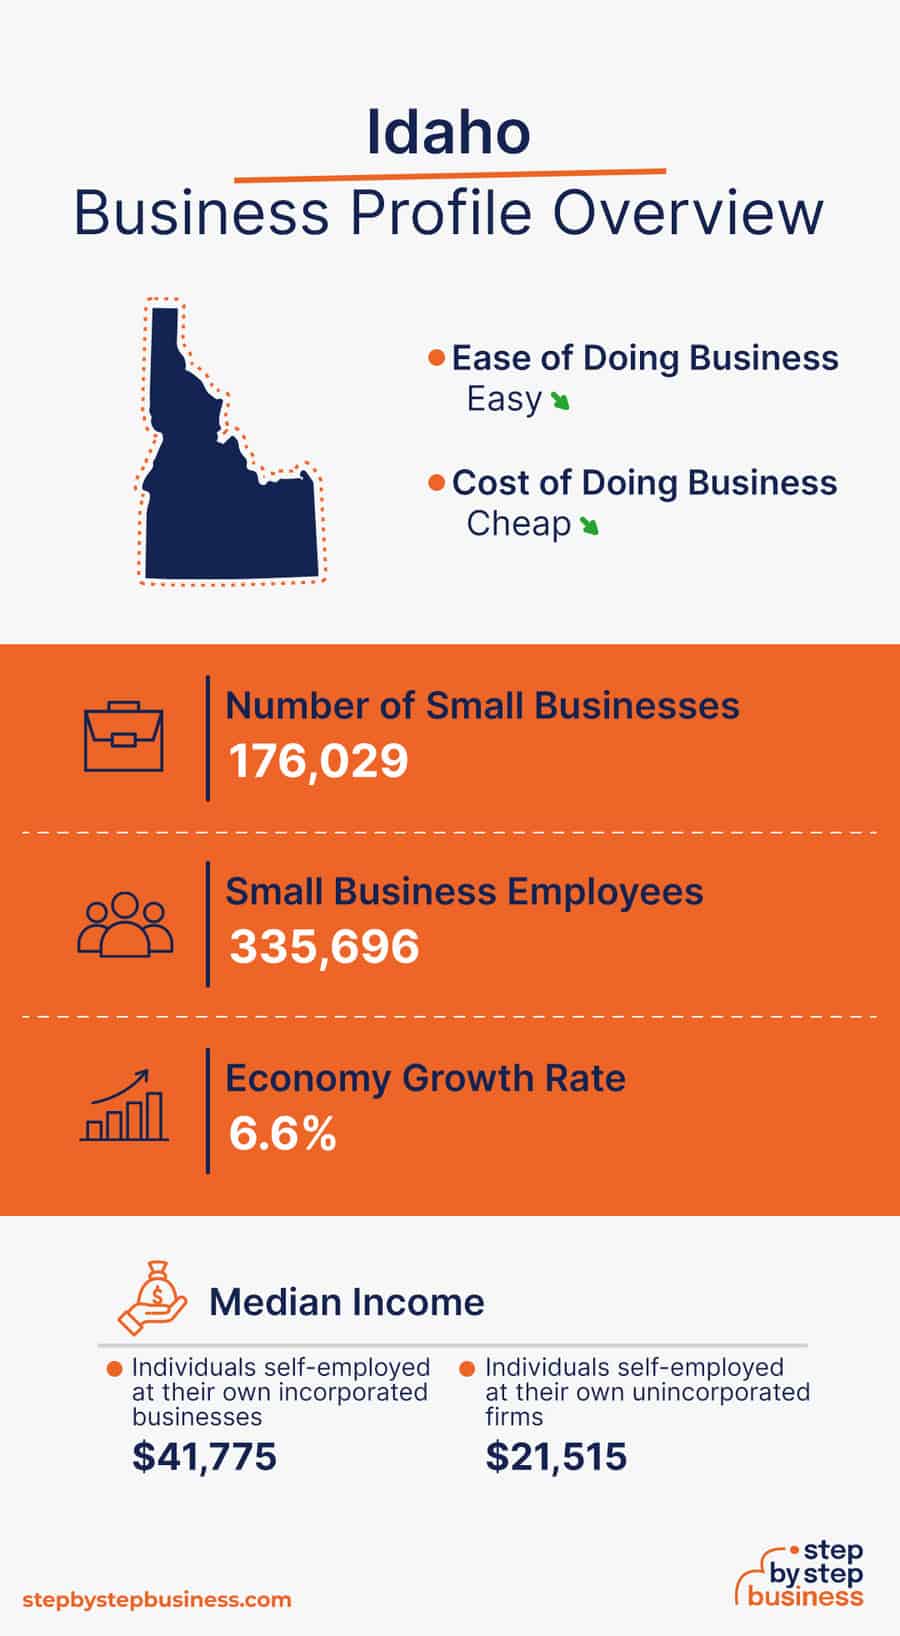 Idaho Business Profile Overview